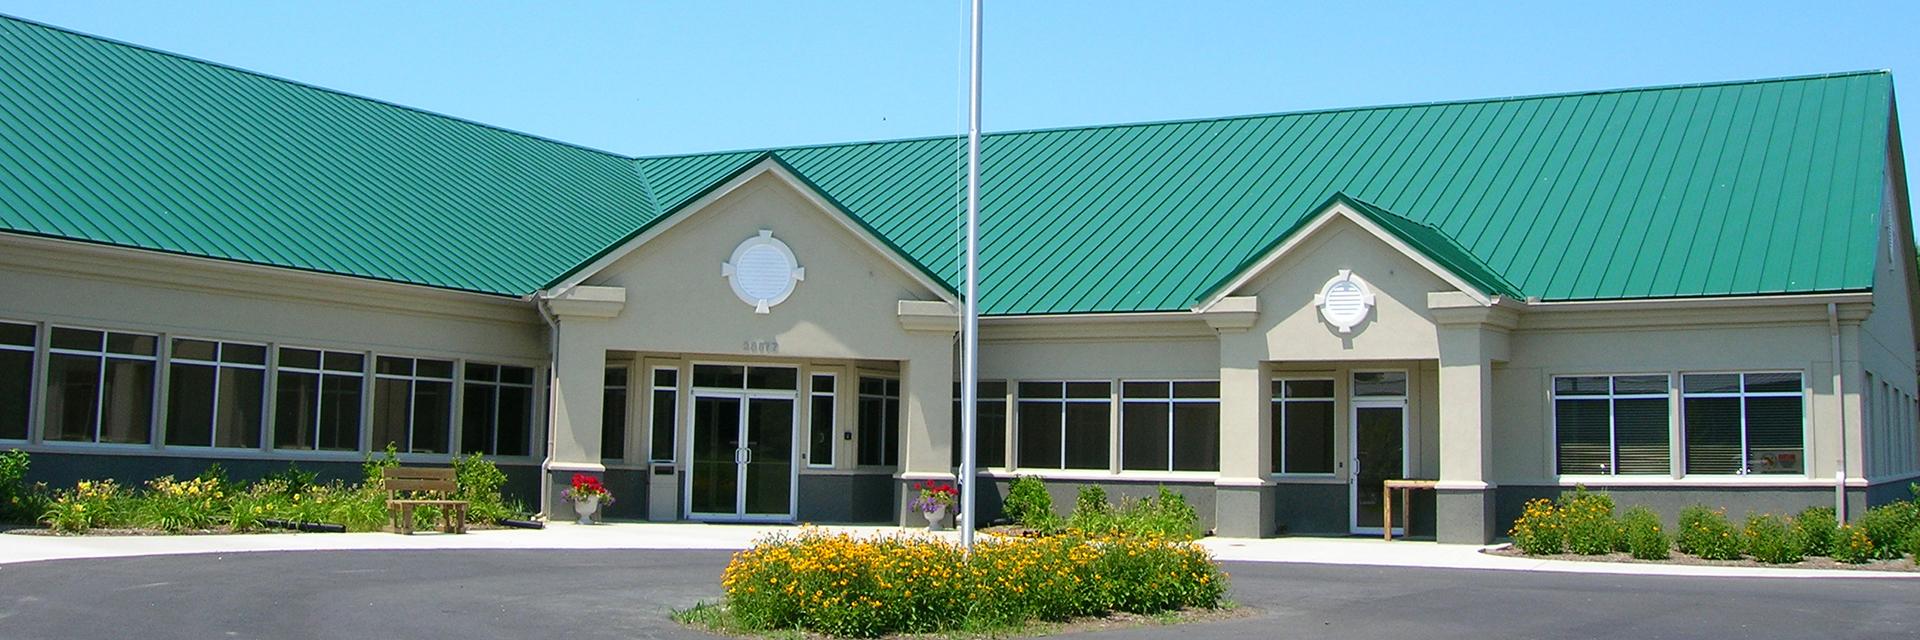 Talbot county tan office with green roof and yellow flowers surrounding a flag pole